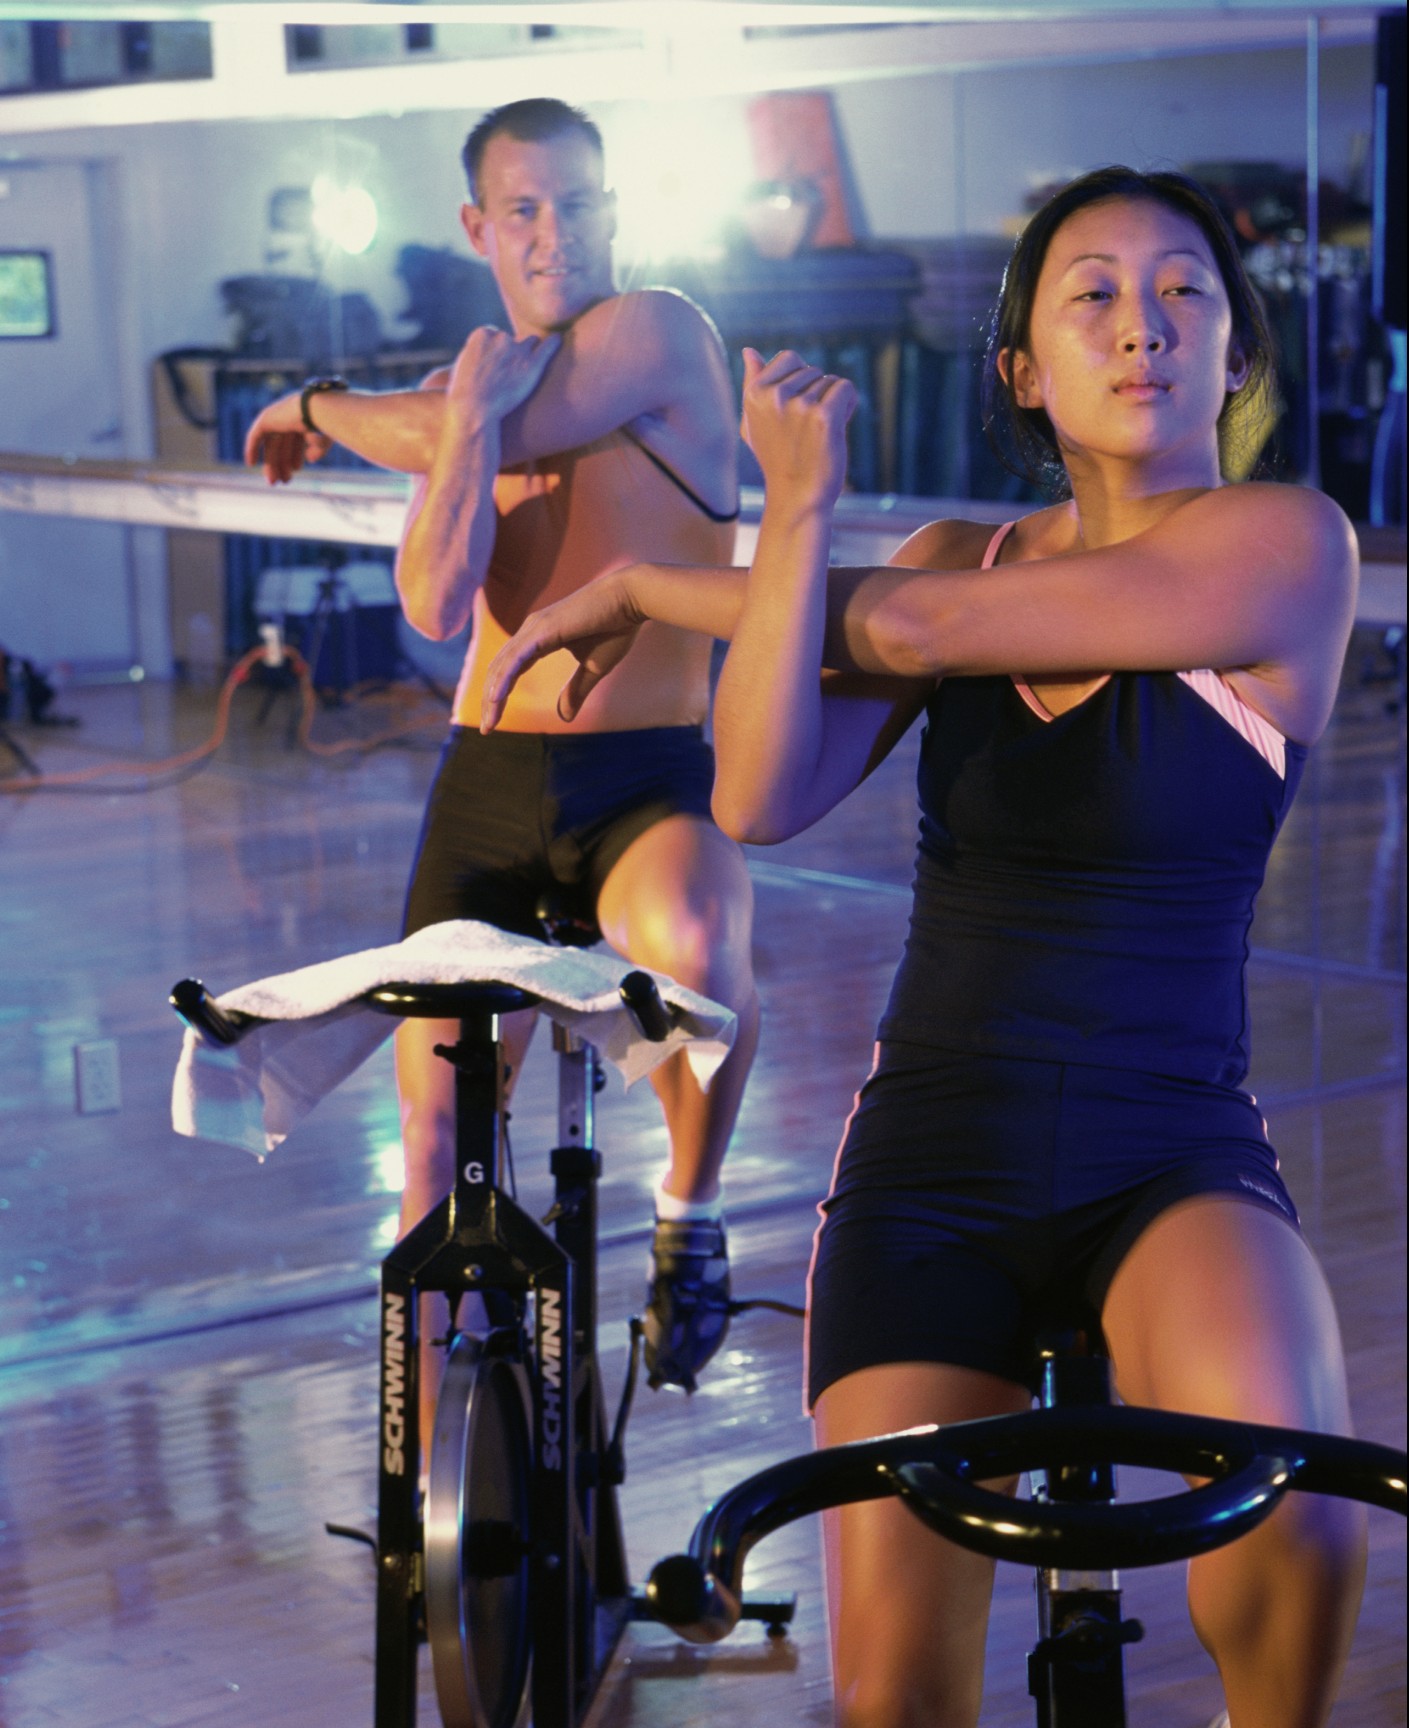 Two people stretching on stationary bikes